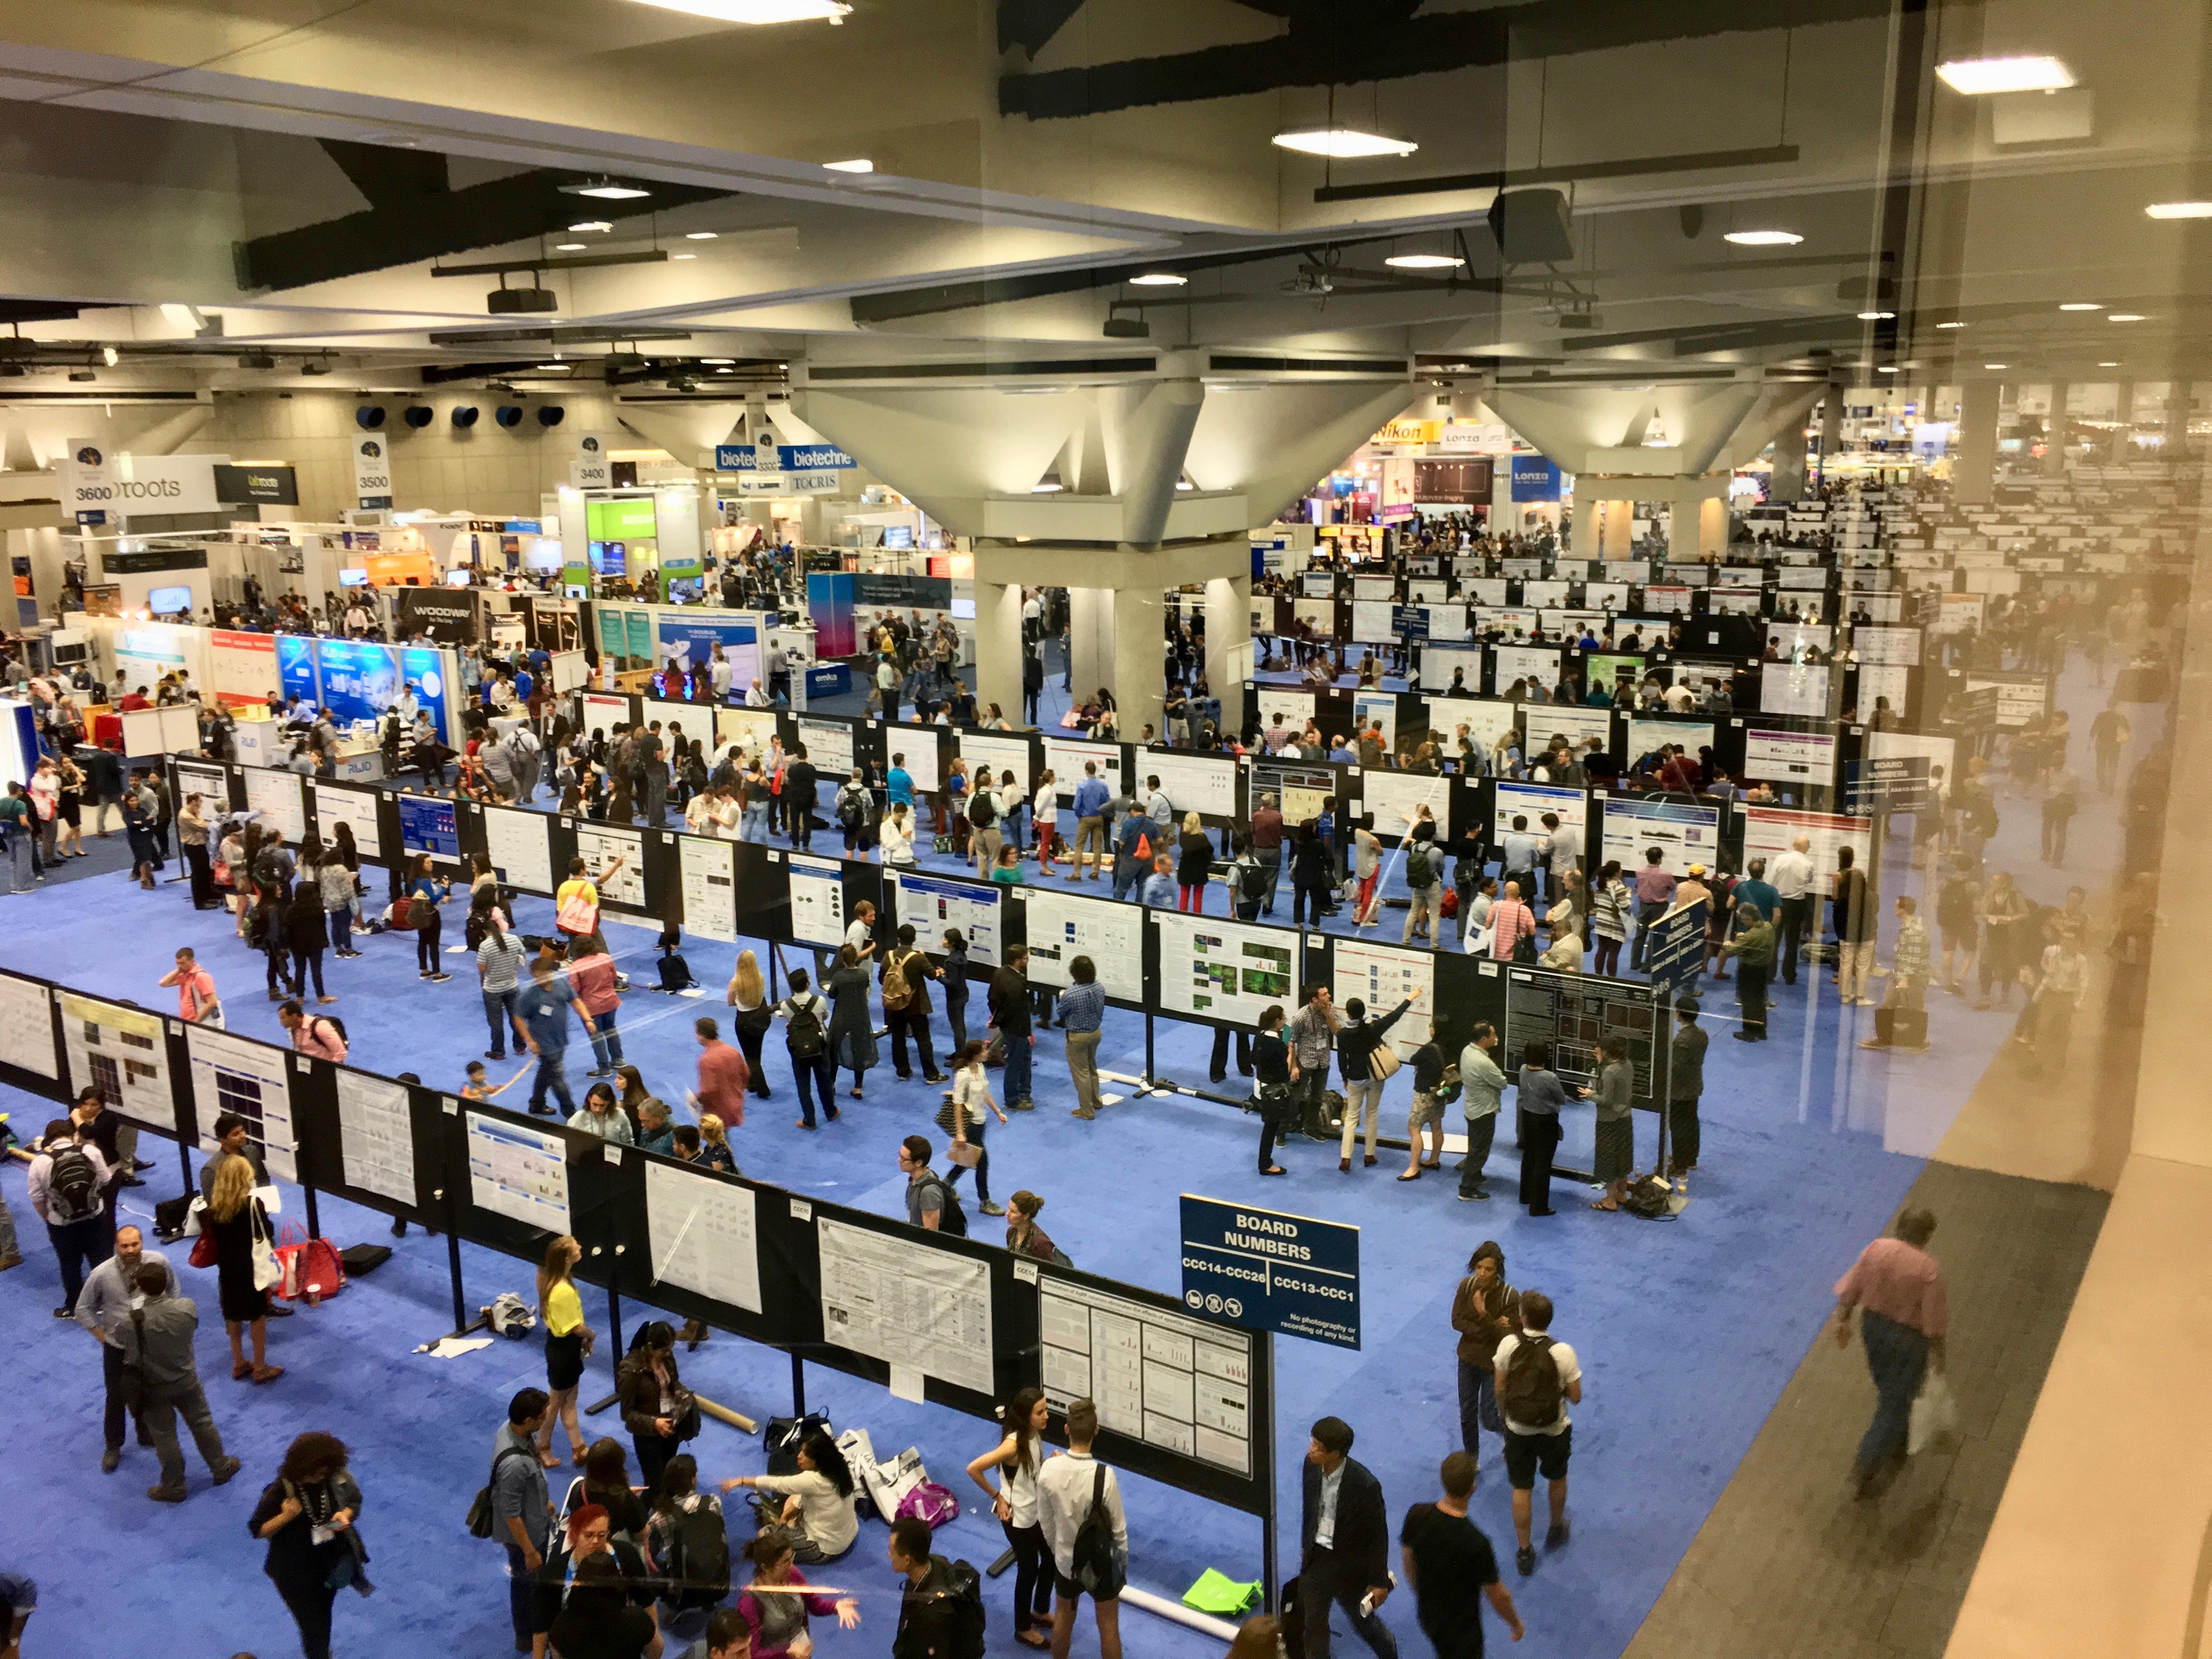 Getting the Most out of Scientific Conferences The Open Notebook